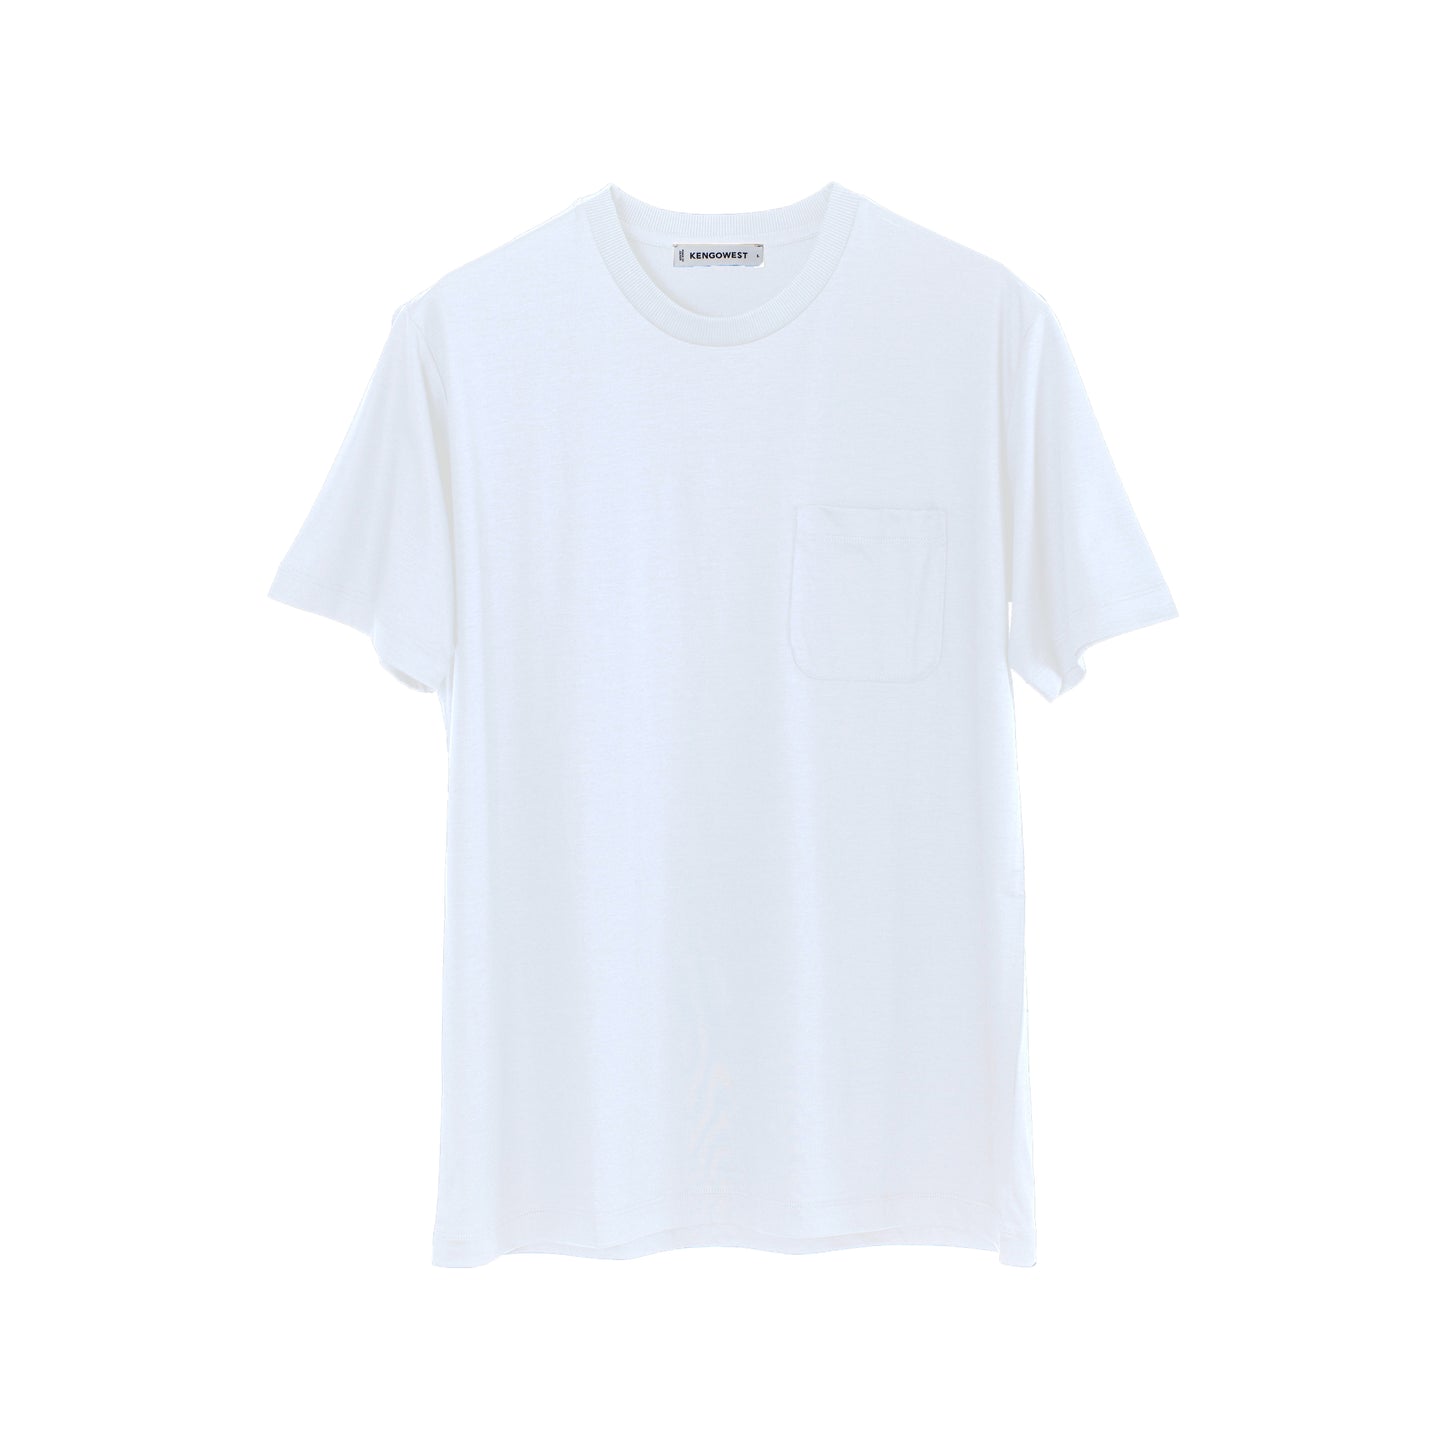 Pocket included Short Sleeve Slim Fit Crew Neck T-shirt 3-Toryu (White)